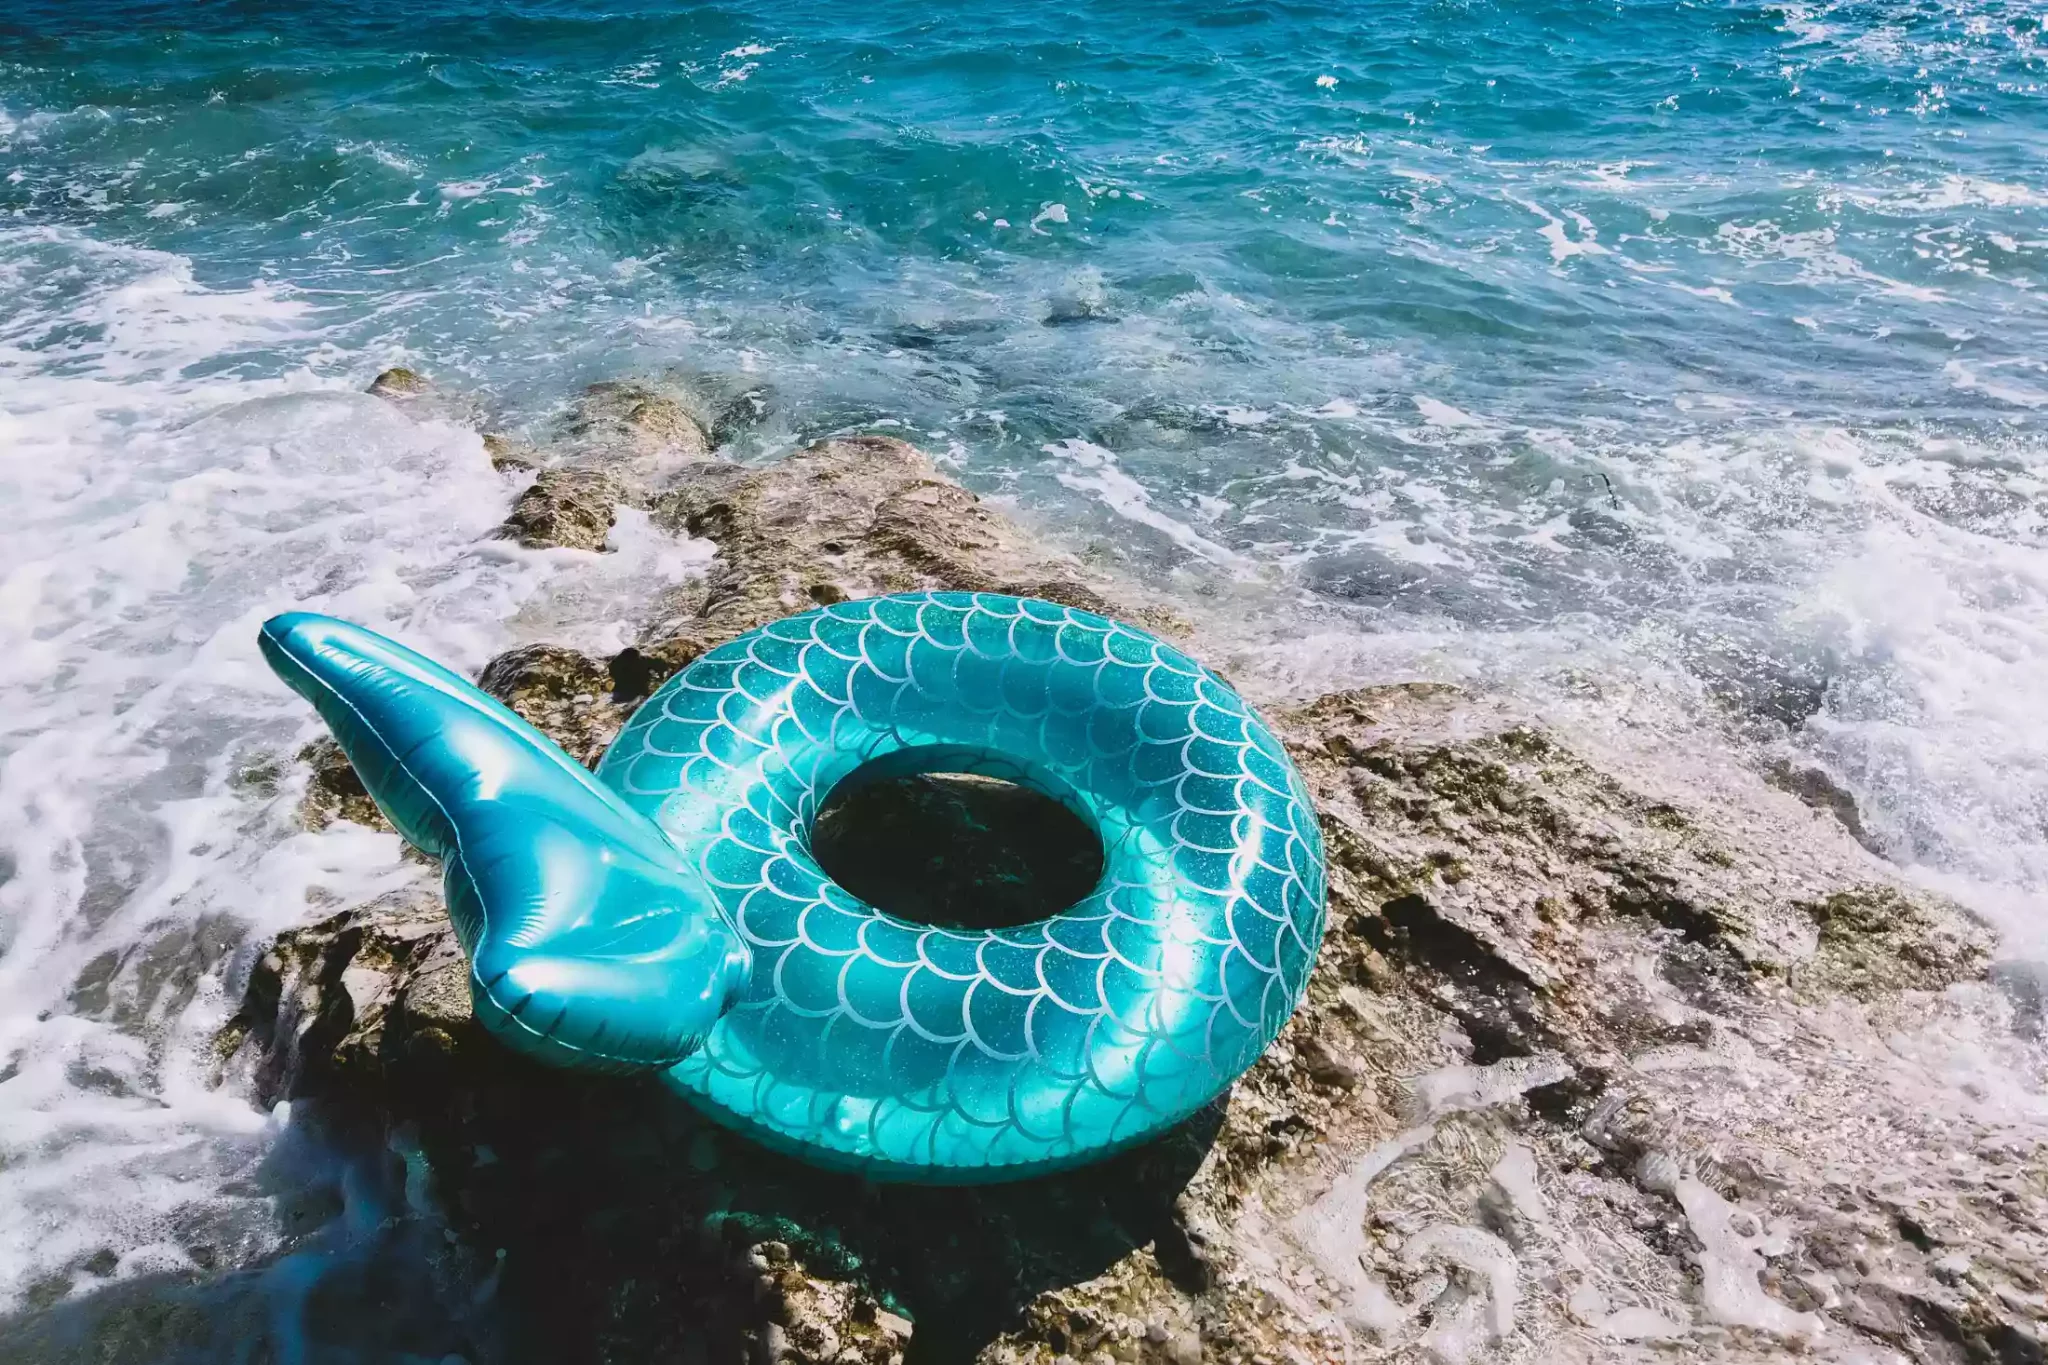 Inflatable Pool Ring with Mermaid Tail on the Rocks.